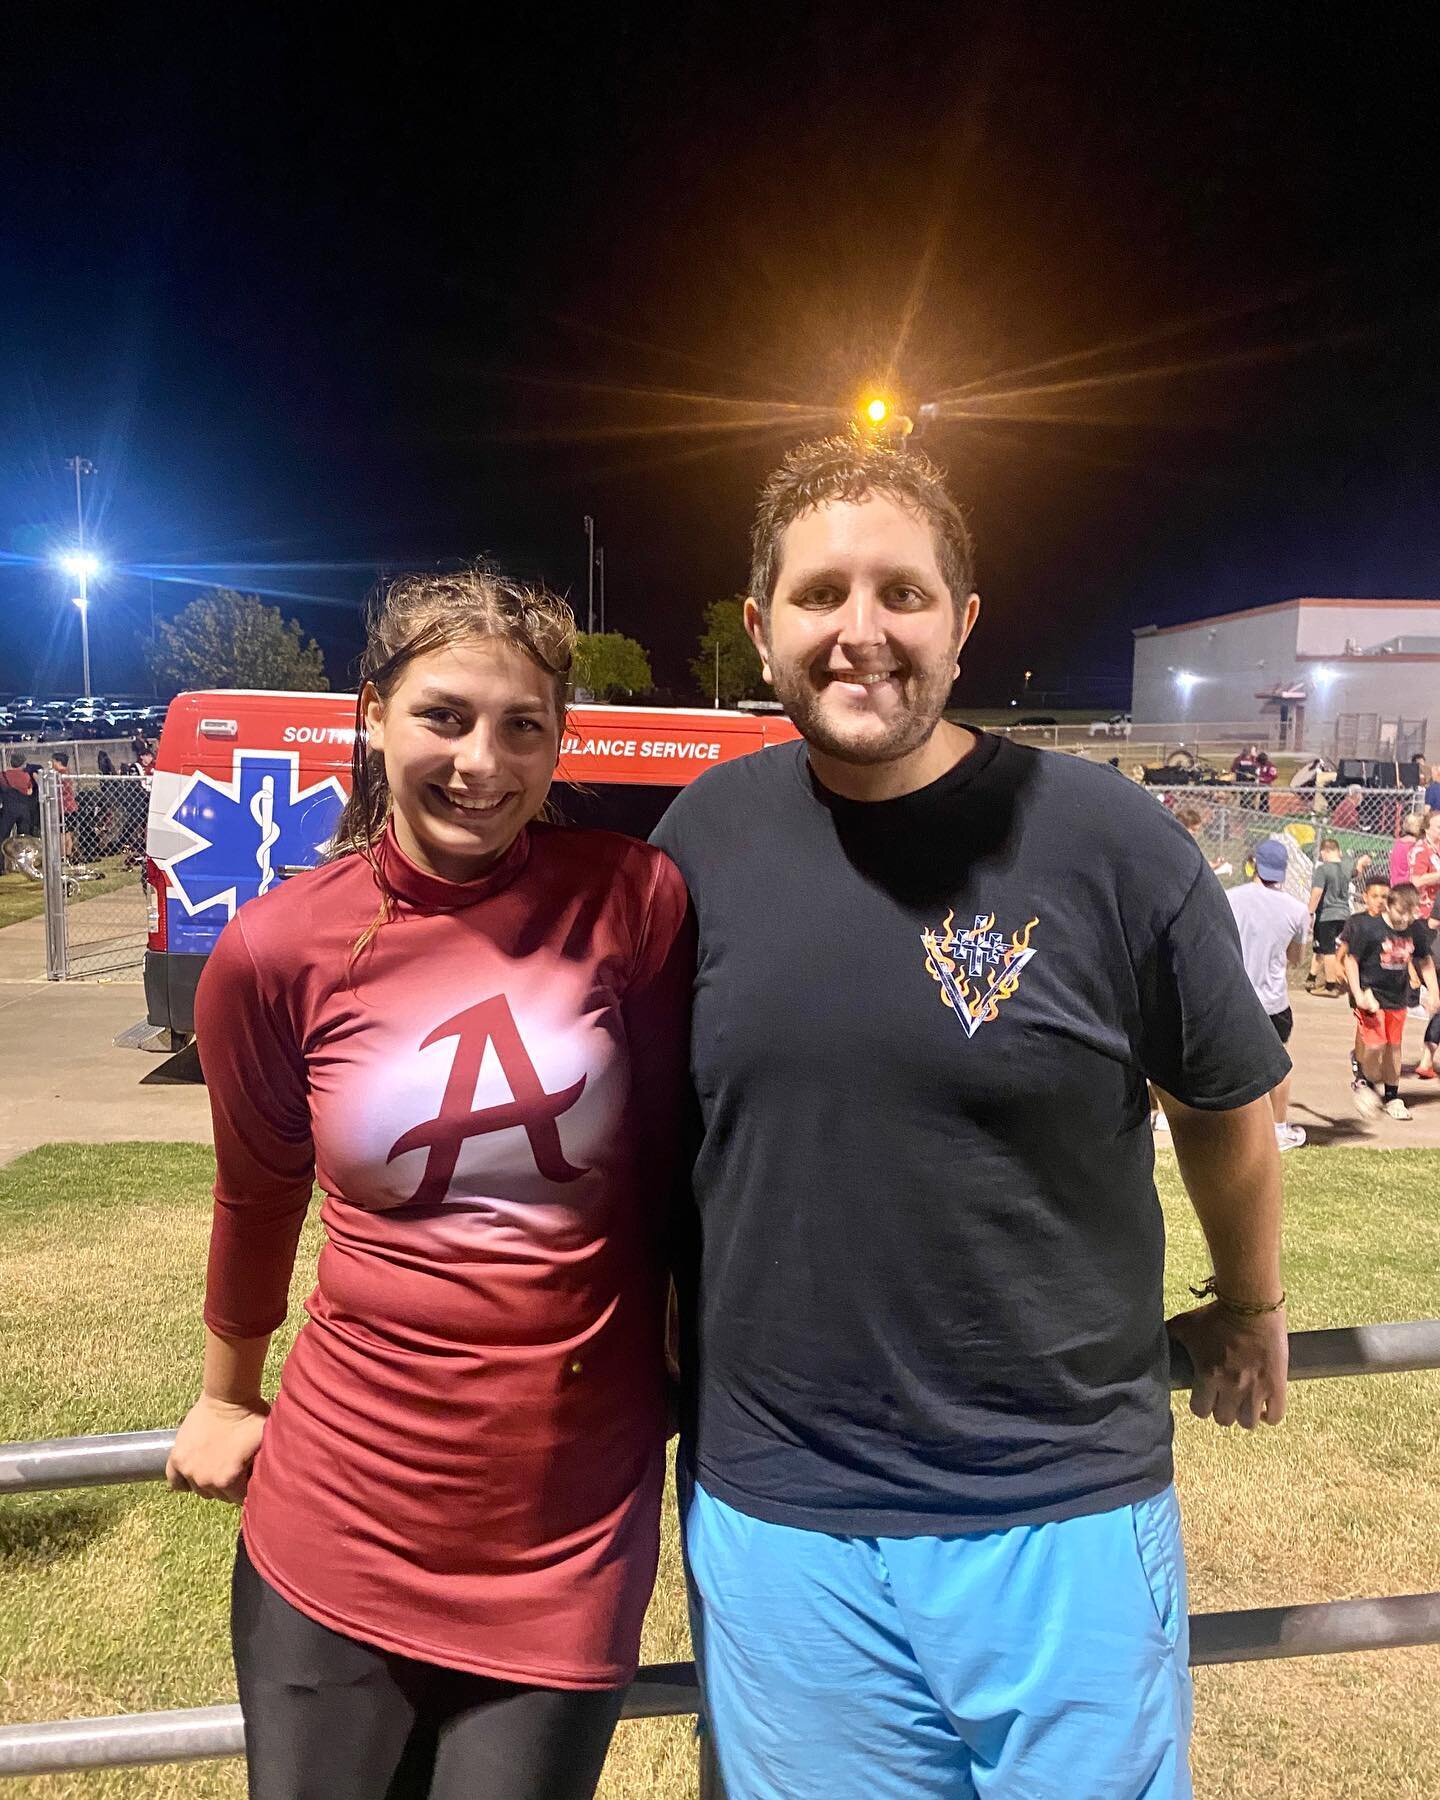 Came out to support our very own @megann.2468 for Ardmore High Color Guard and also managed to catch Will L. performing in the Ardmore Middle School / @ardmorebands combined band. Scroll over to #4 for an awesome video!

1: Megan and John
2: Combined